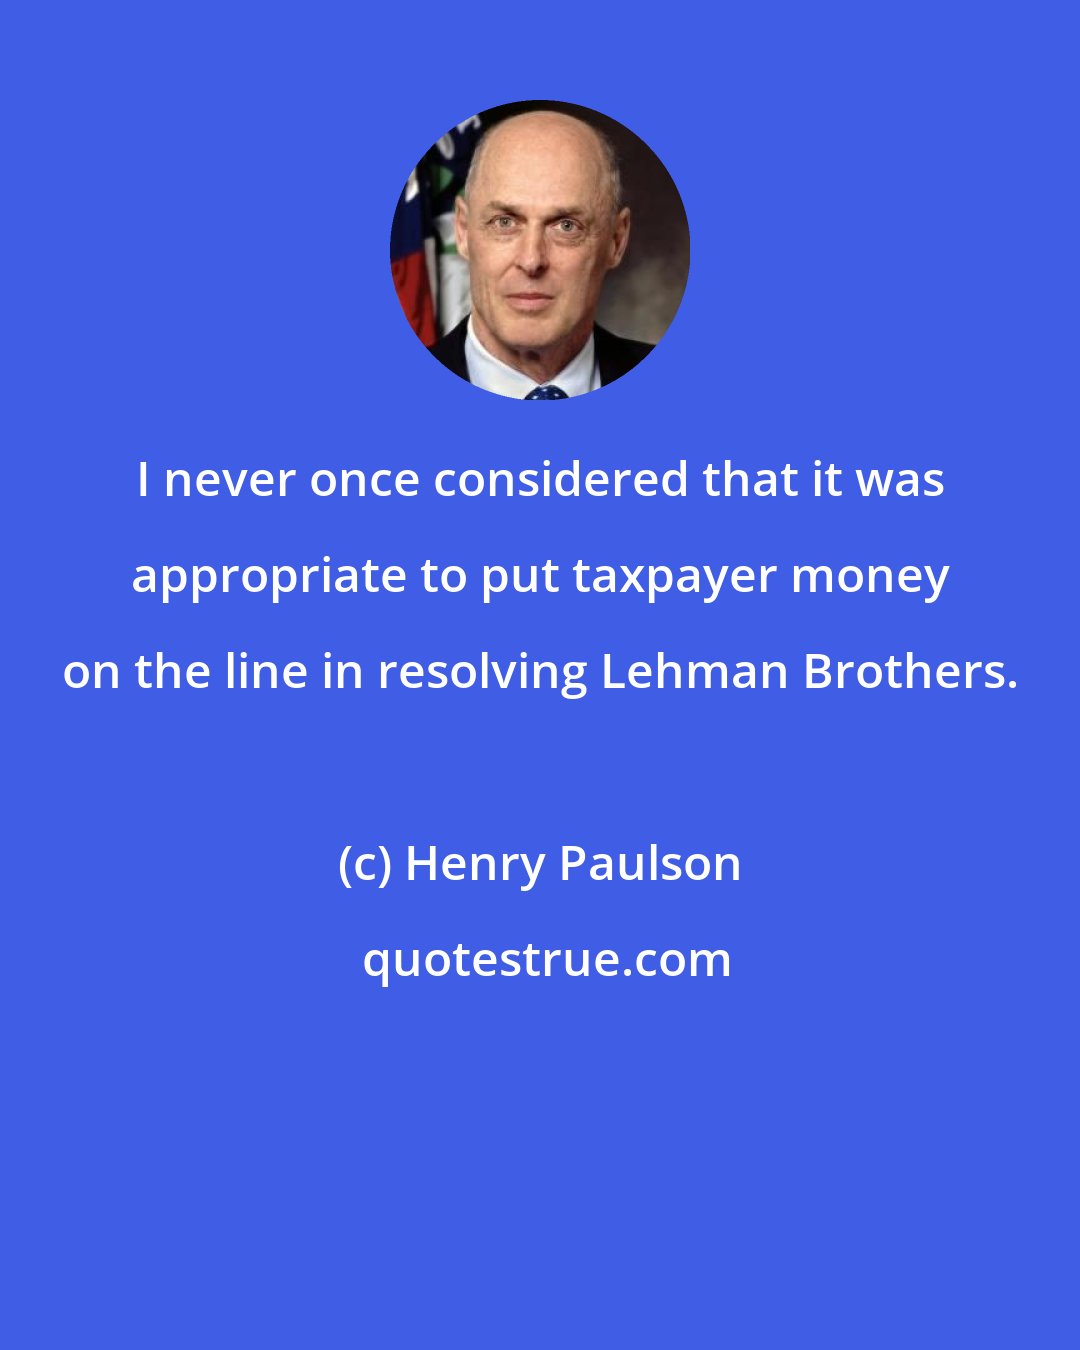 Henry Paulson: I never once considered that it was appropriate to put taxpayer money on the line in resolving Lehman Brothers.